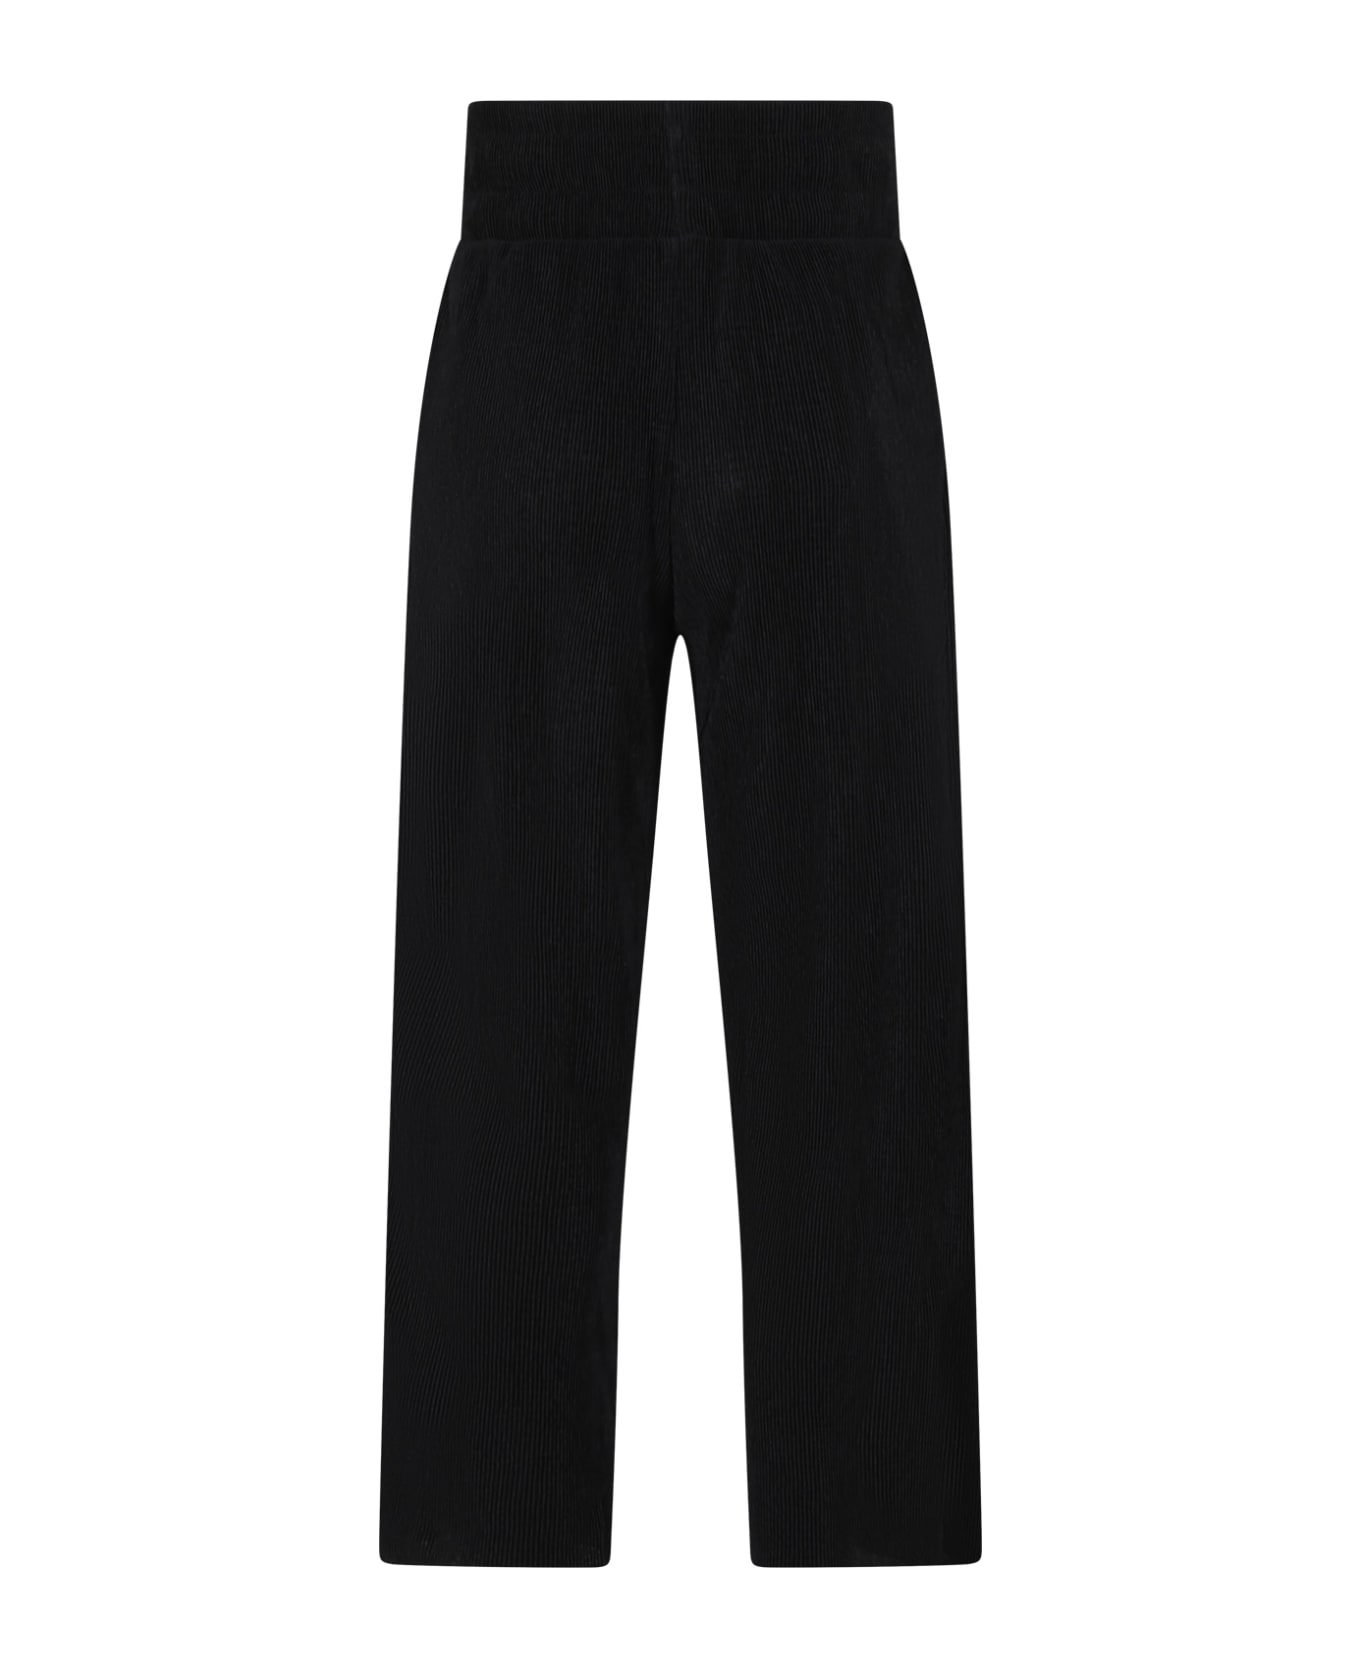 DKNY Black Casual Trousers For Girl - Black ボトムス